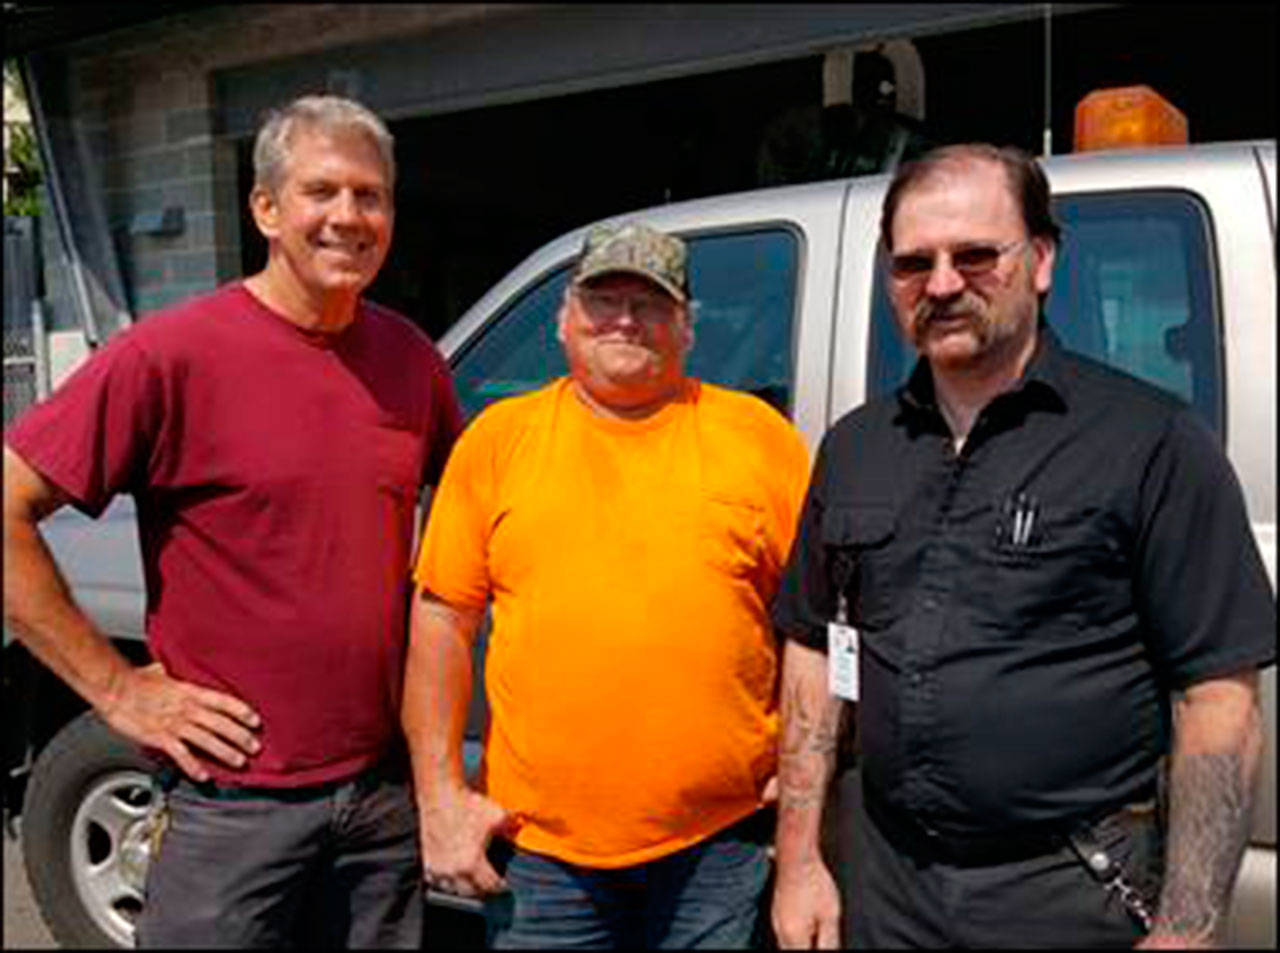 The city’s wastewater treatment plant operators: Doug Otte (26 years of service with the city); Delbert Frantz (35 years of service); and Steve Pyke (33 years of service). (Photo courtesy of the city of Bainbridge Island)